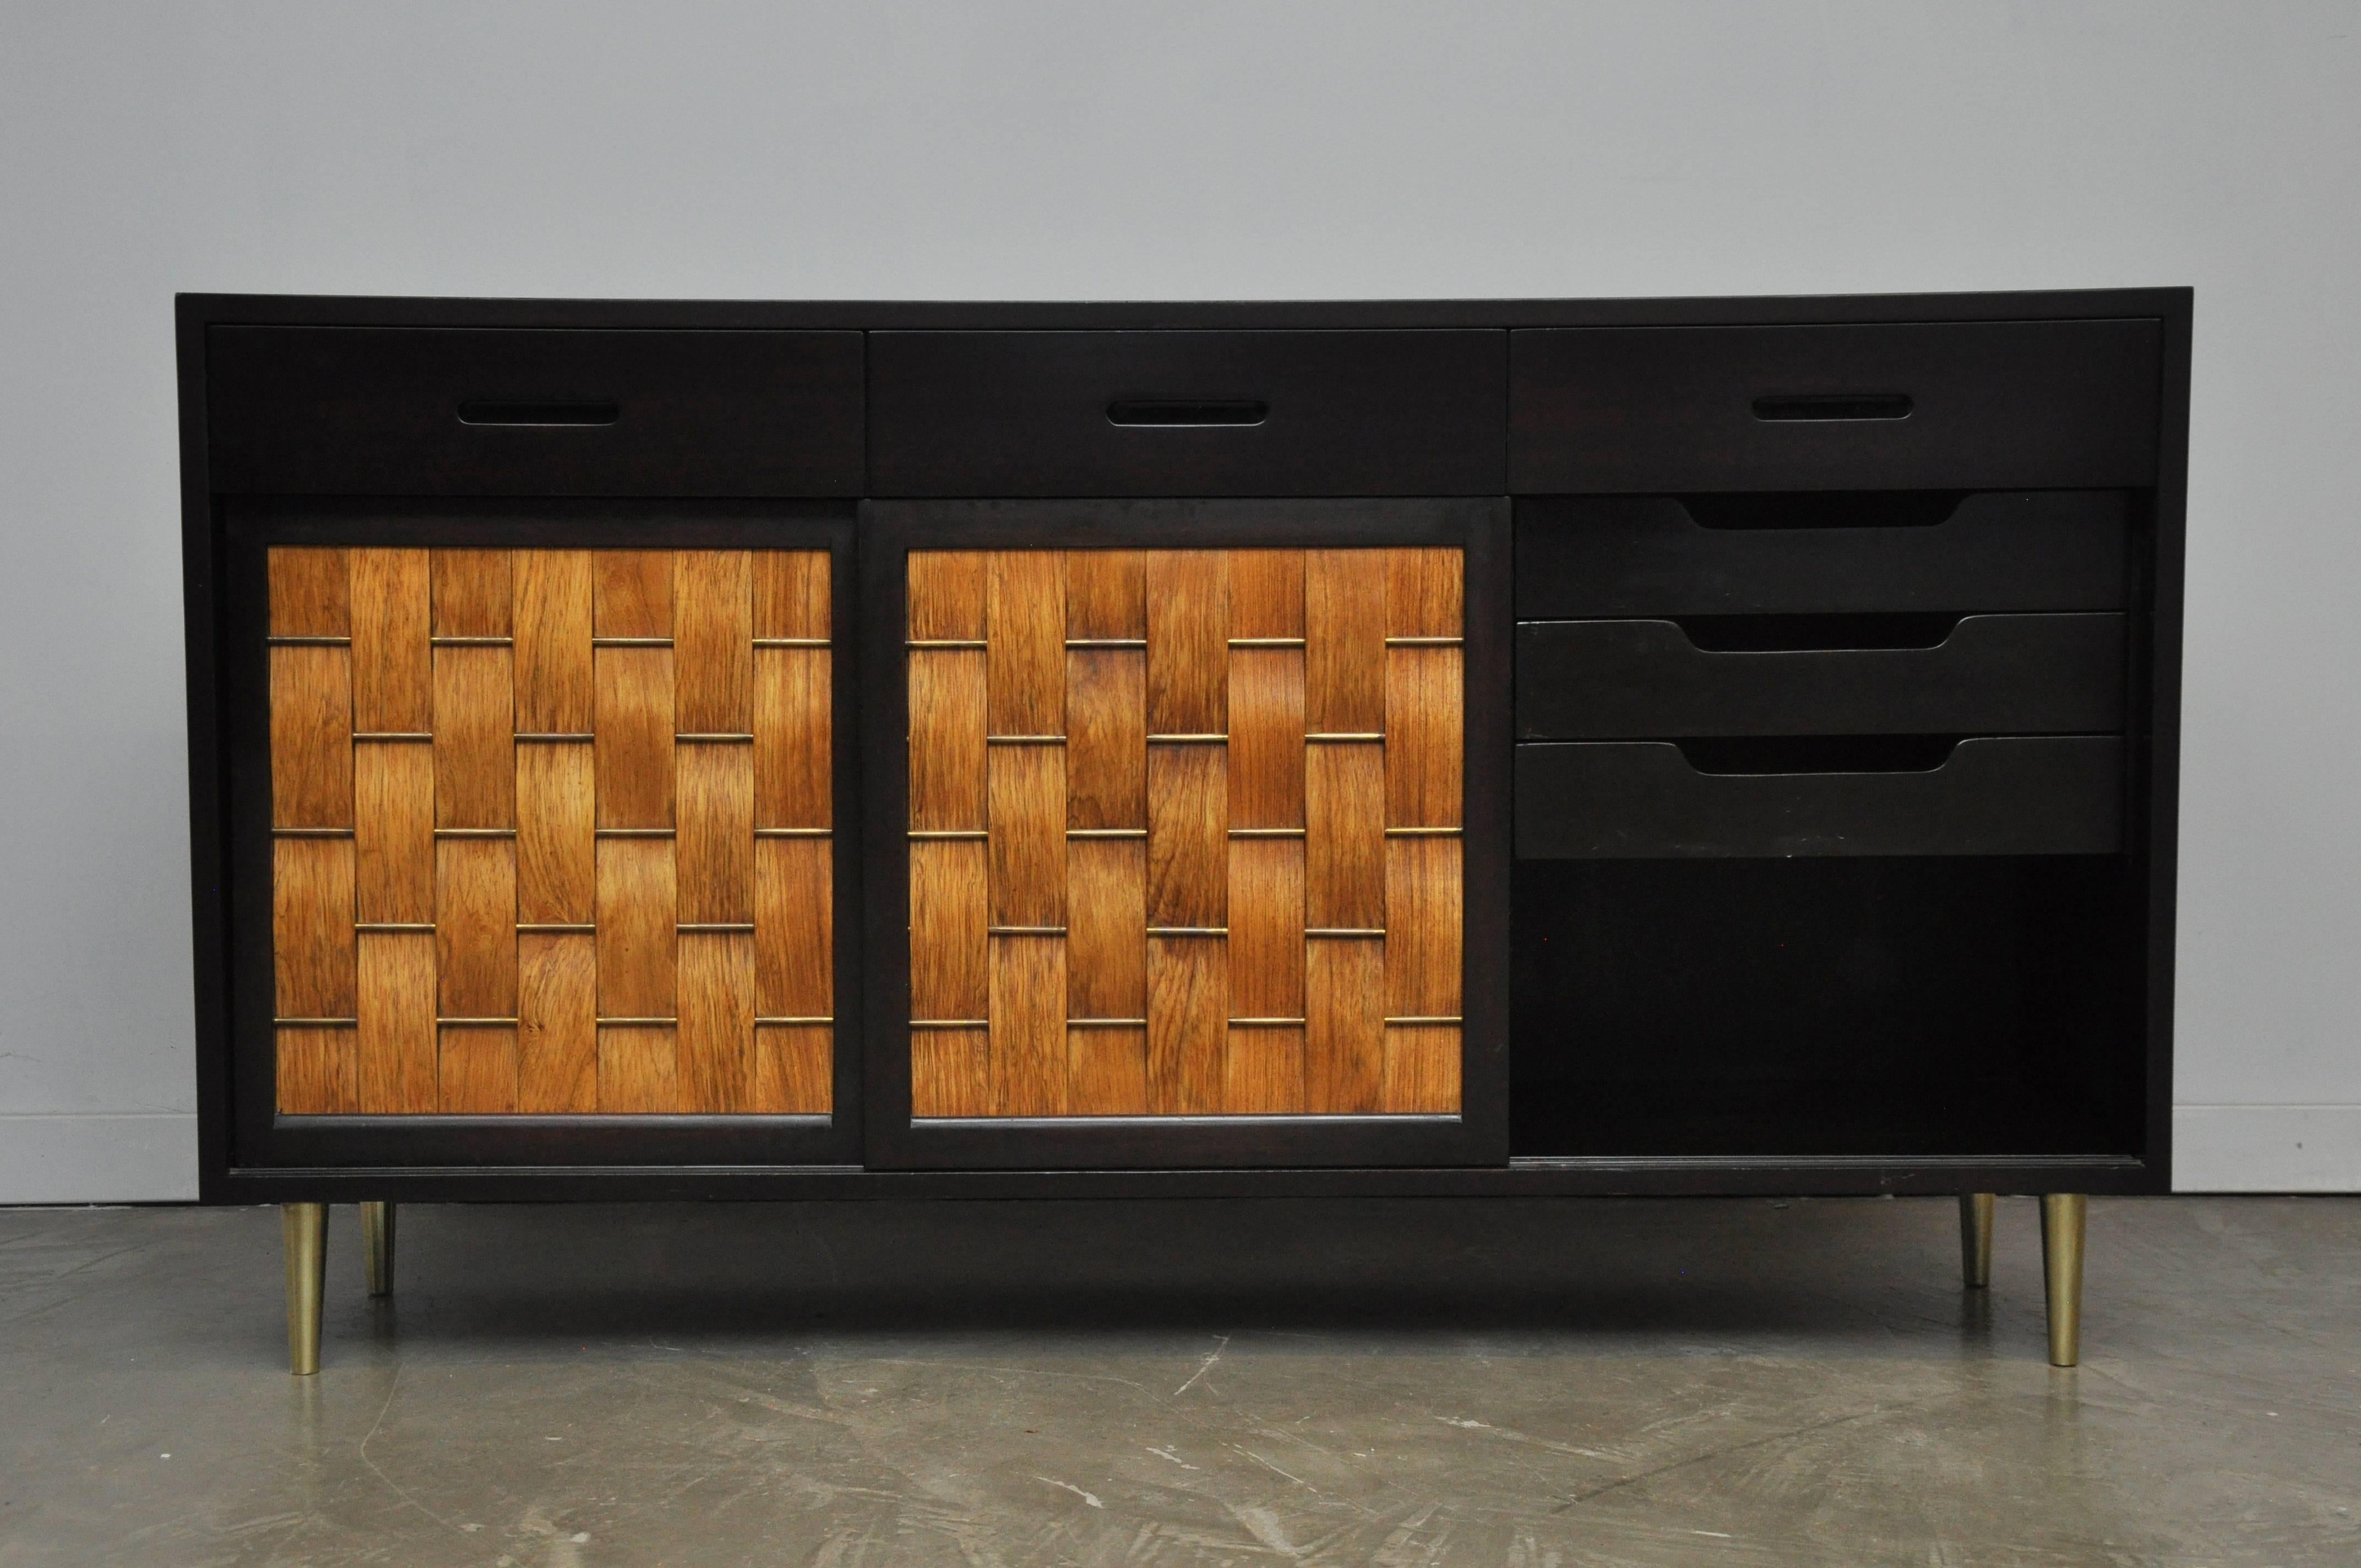 Three-door credenza designed by Edward Wormley for Dunbar. Model #5668. Espresso tone mahogany case with brass details on doors and legs. Three woven bleached rosewood sliding doors. Beautiful restored condition.